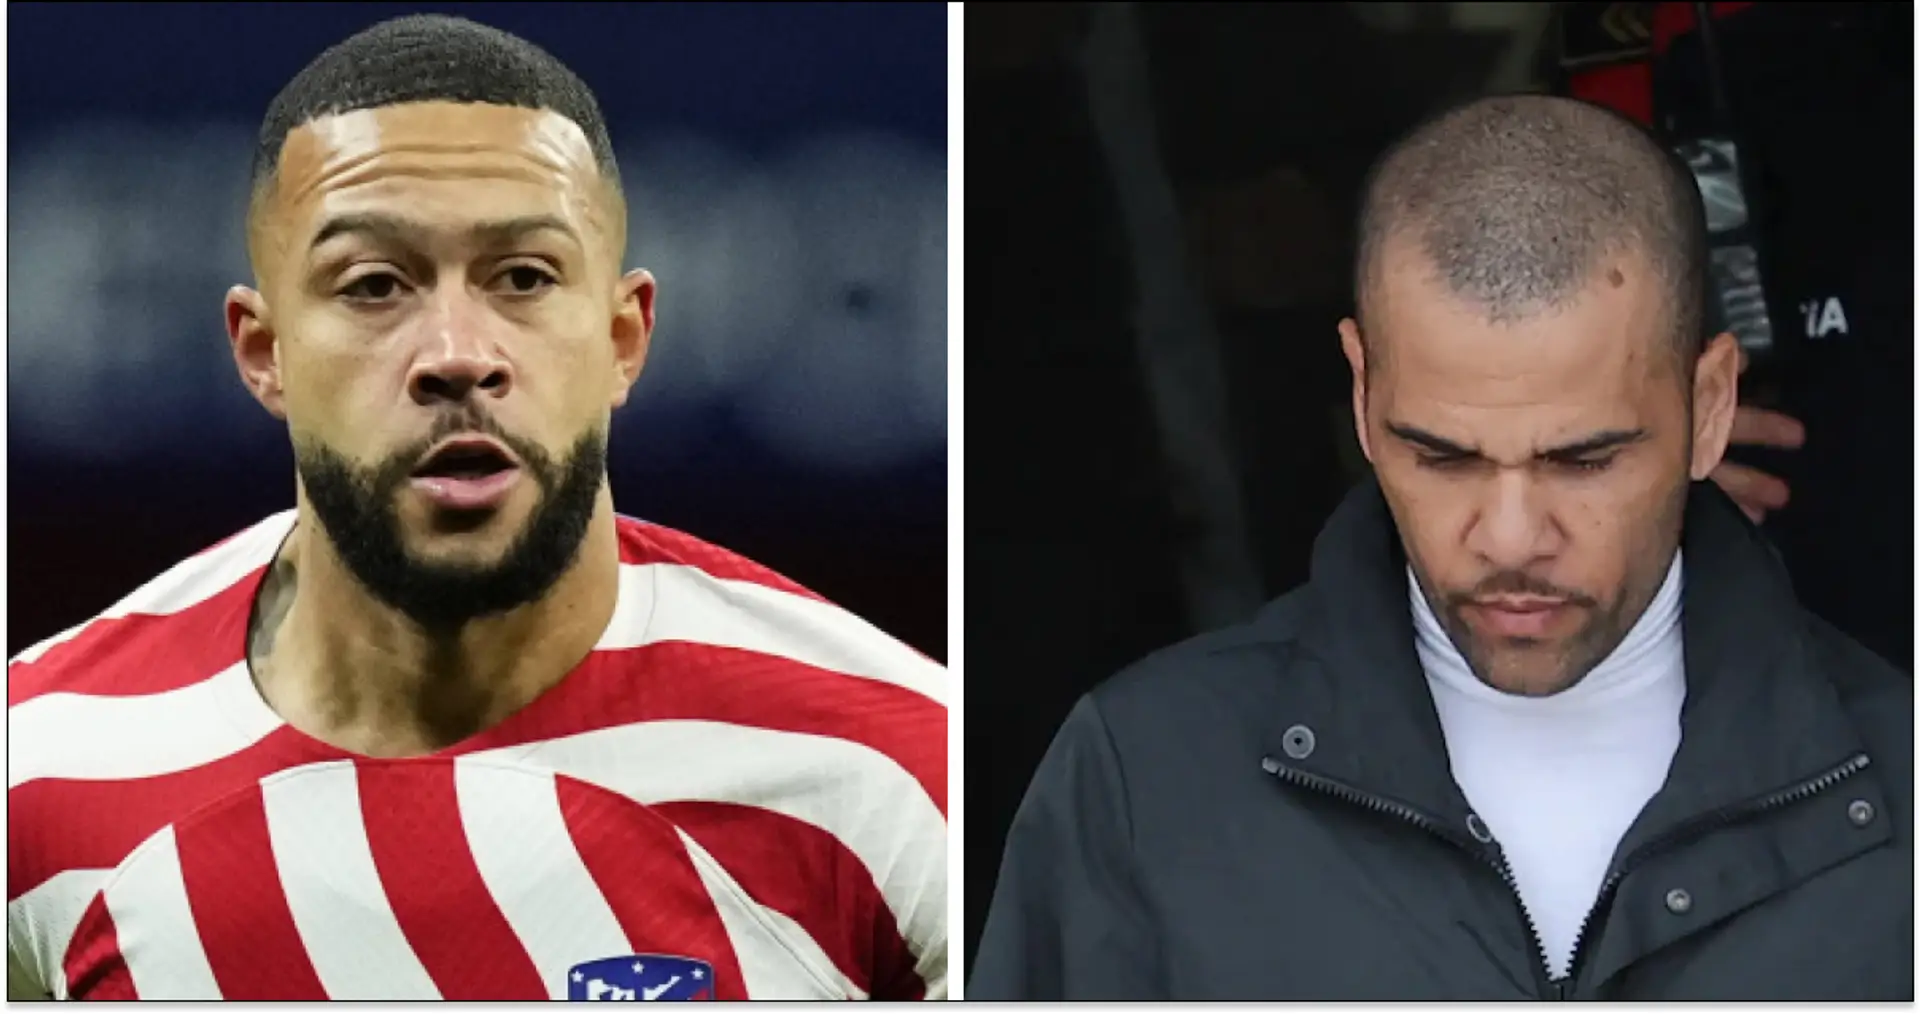 Did Memphis Depay really pay €1m to bail Dani Alves out of jail?